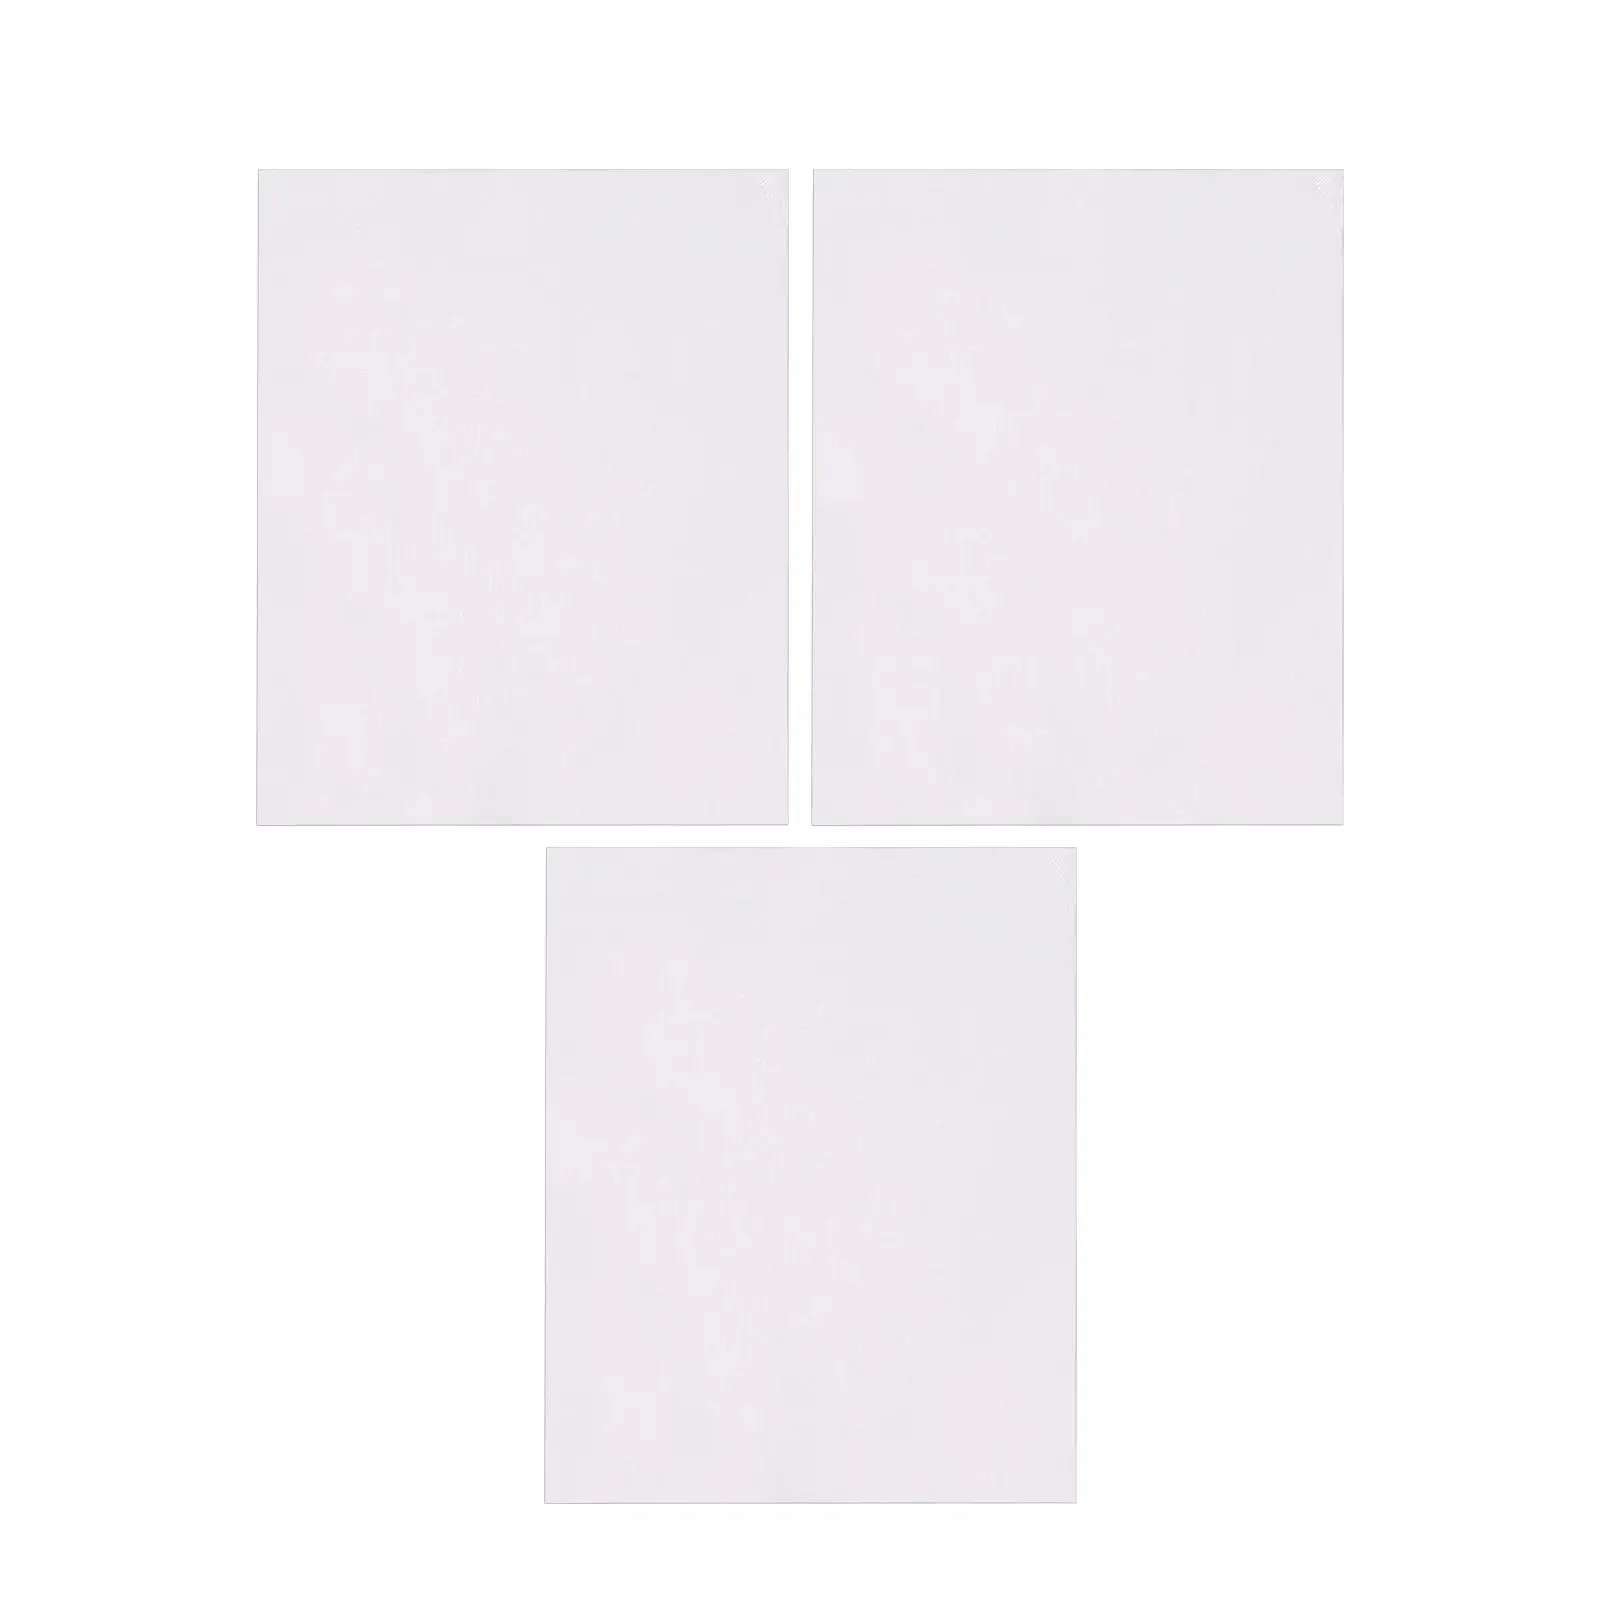 3x Cotton Artist Blank Canvas Boards Acrylic Oil Painting Canvas Panels for Amateurs Oil Painting Adults Kids Beginners Students